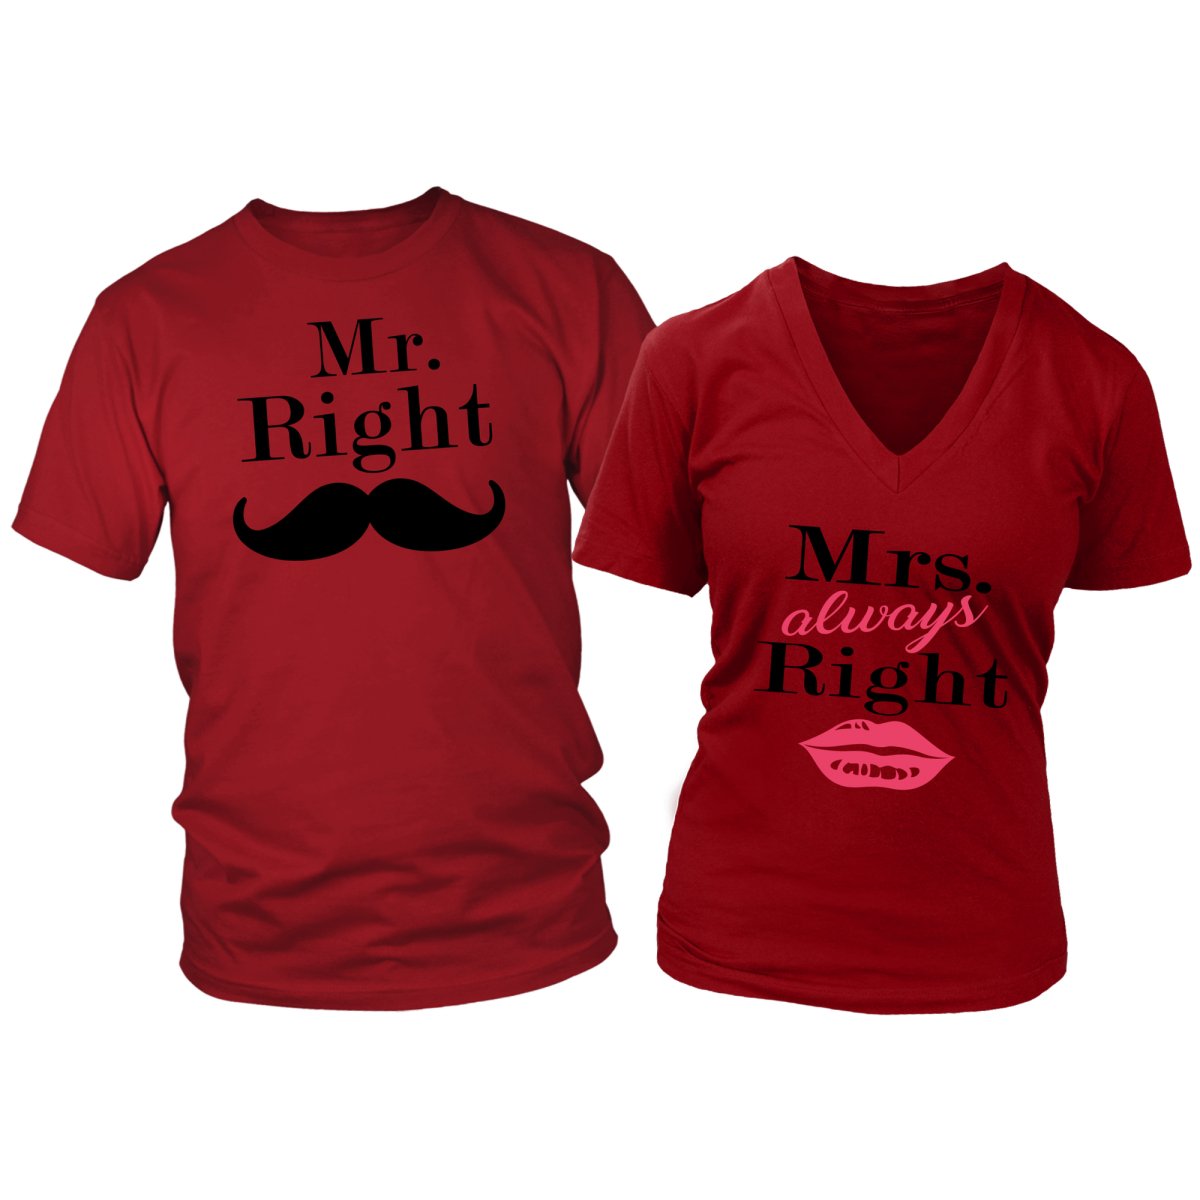 Mr Right/Mrs Always Right Couple's Shirt - Beguiling Phenix Boutique